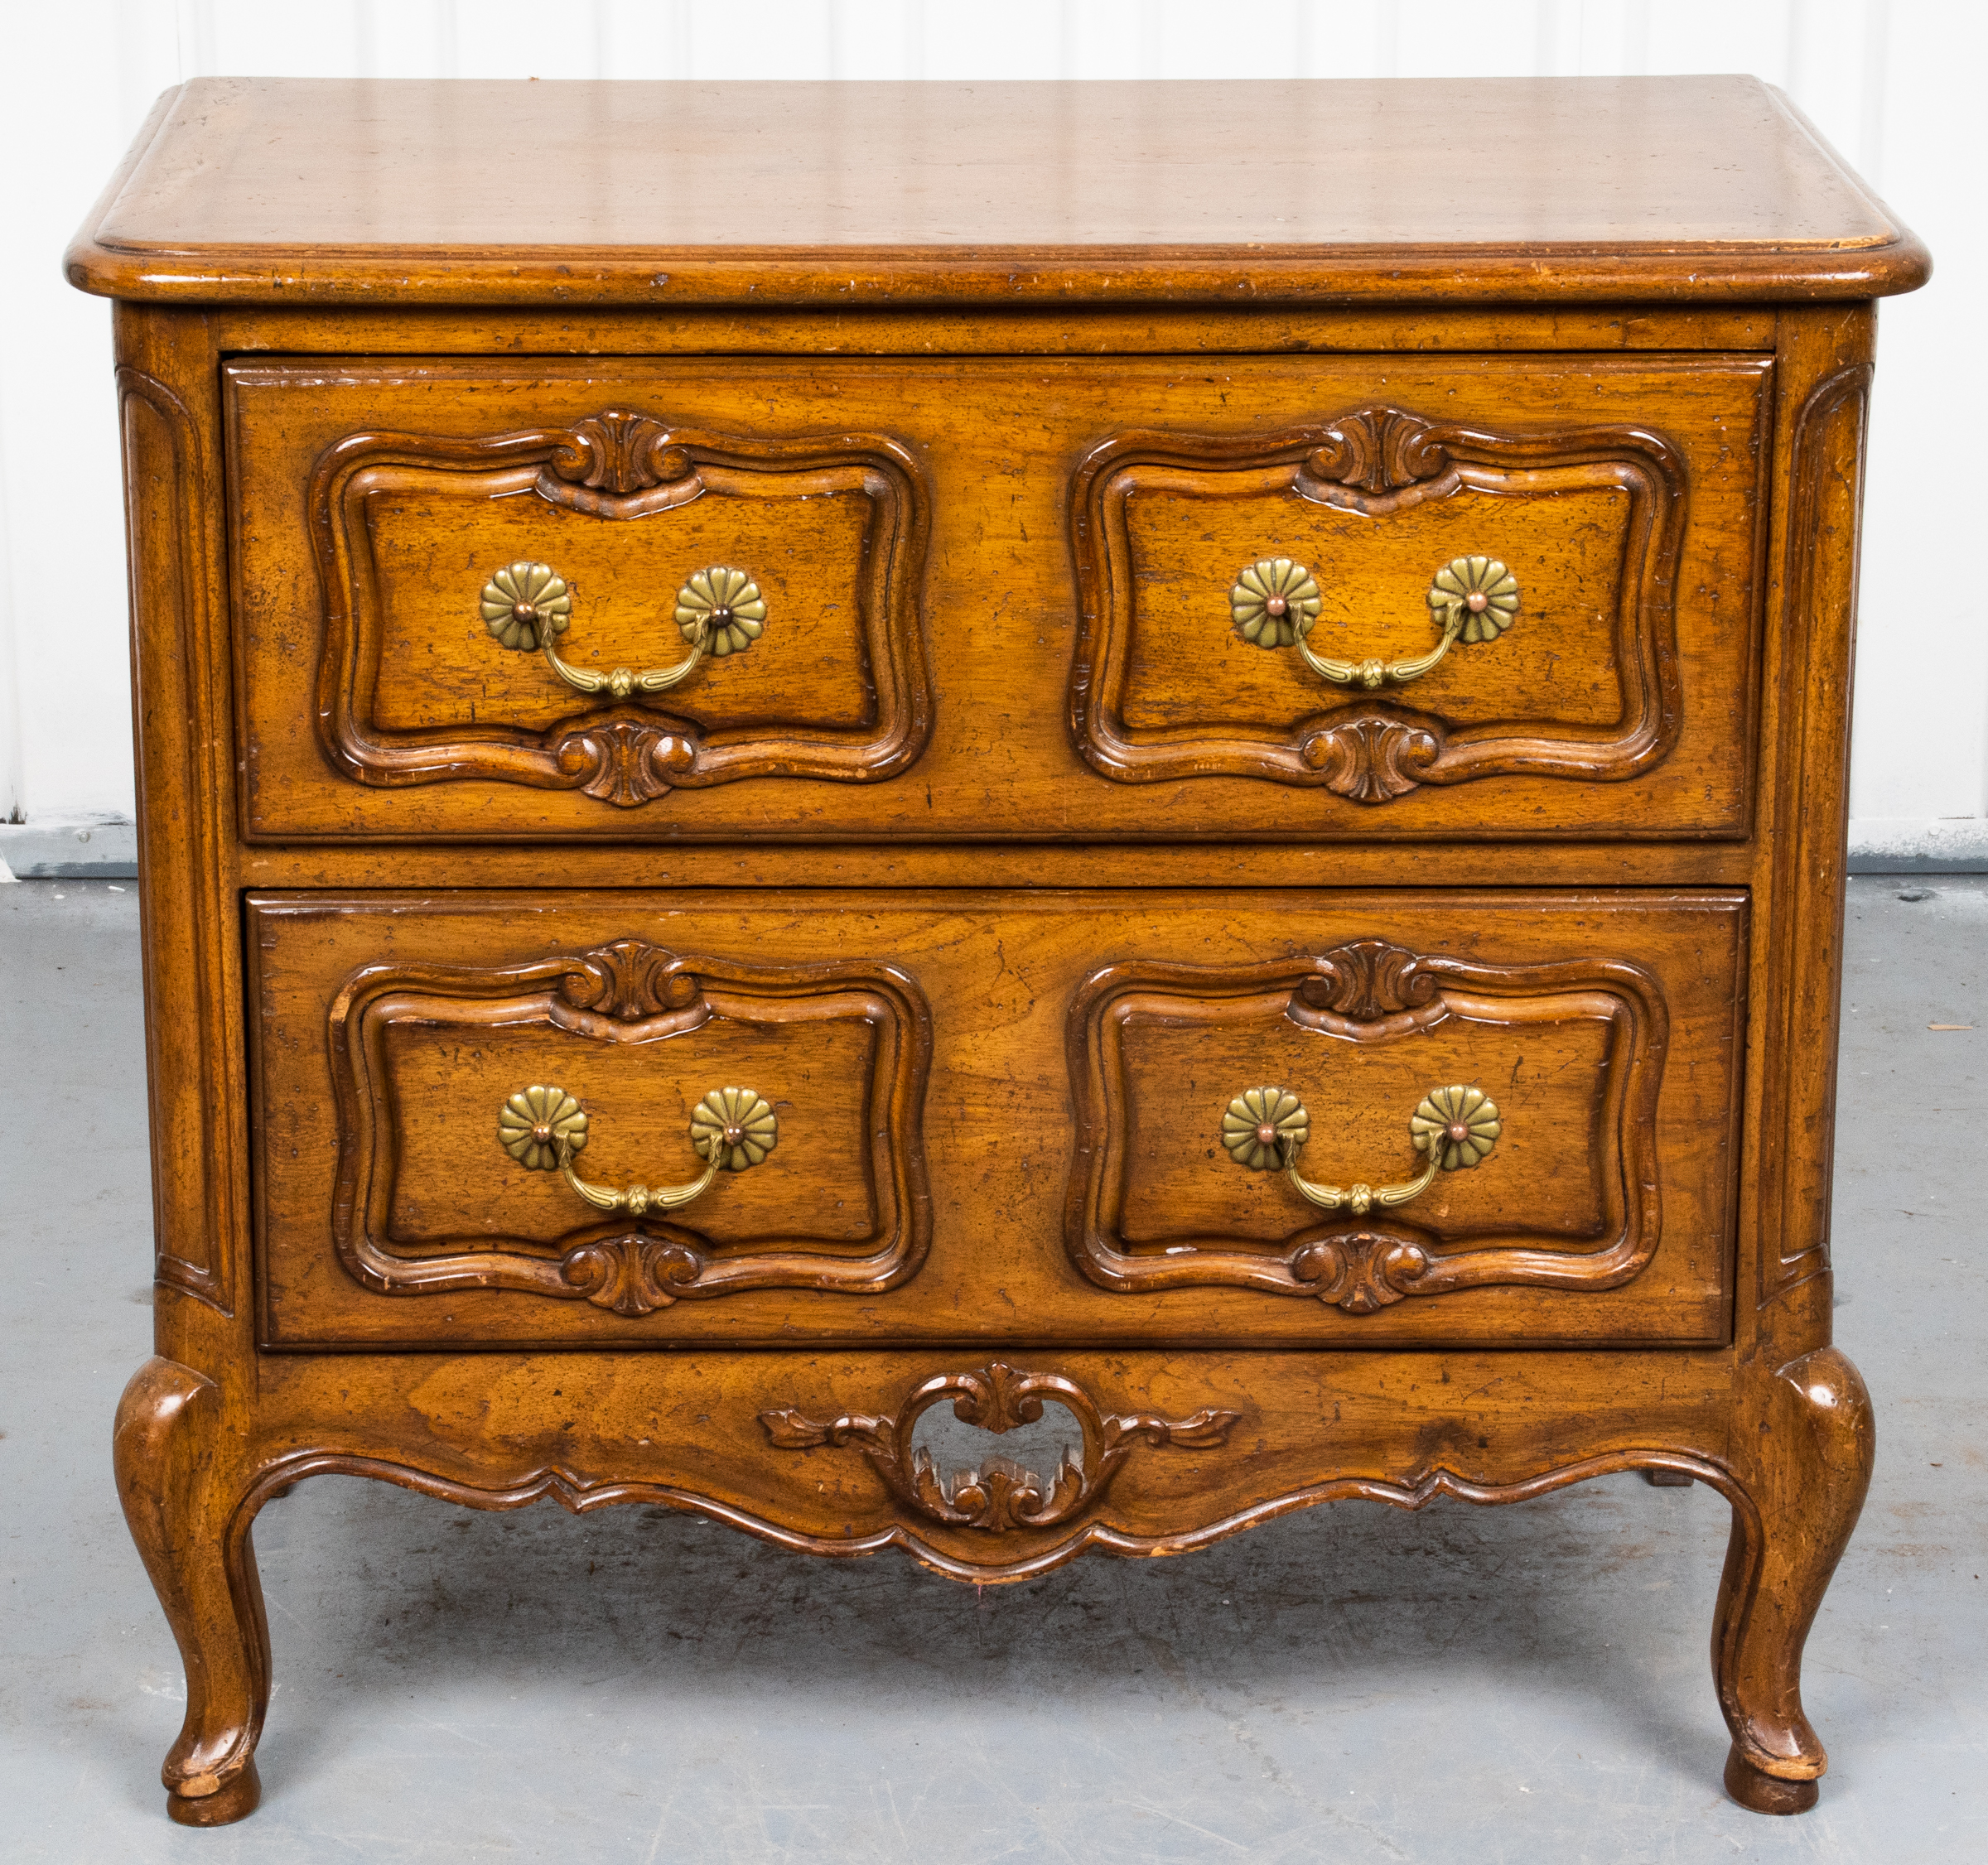 AUFFRAY & CO. FRENCH PROVINCIAL